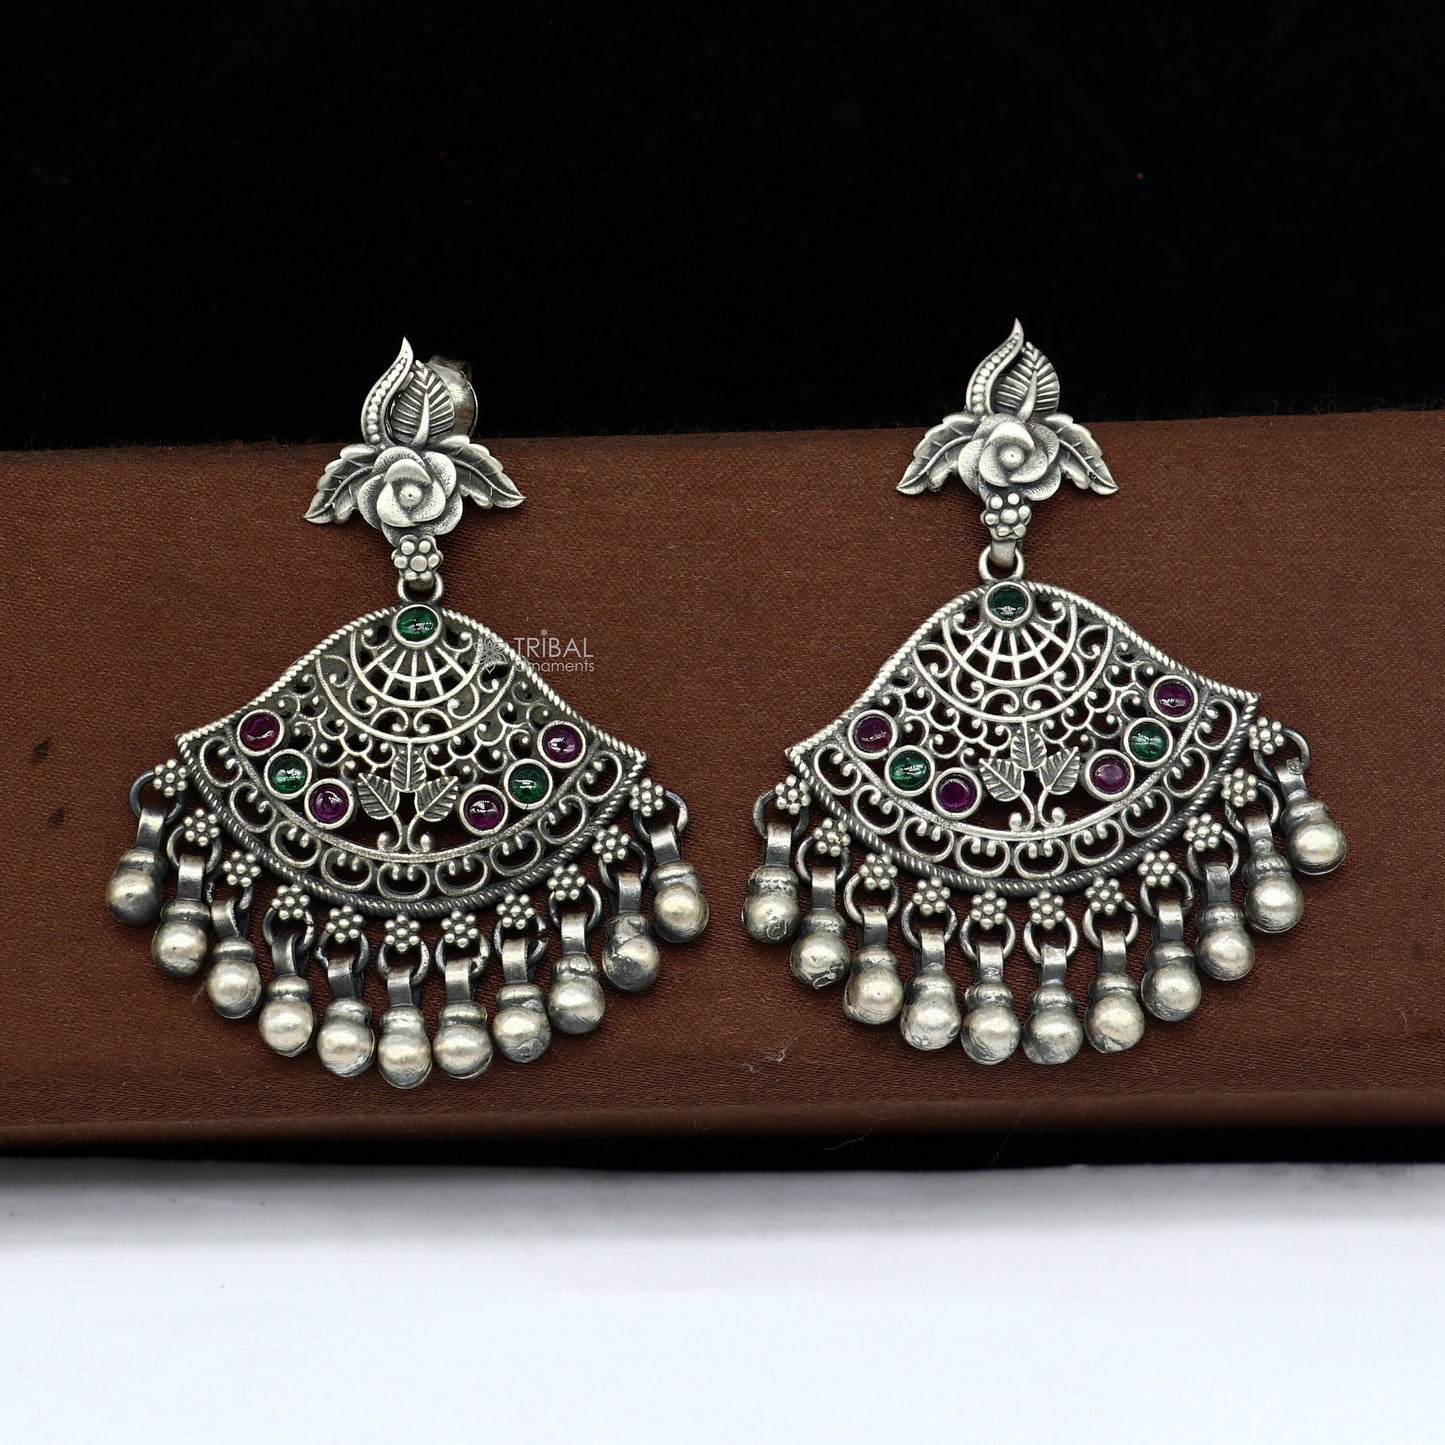 925 sterling silver handmade floral design red & green stone earrings with hanging drops Ghungroo ethnic brides functional jewelry s1235 - TRIBAL ORNAMENTS